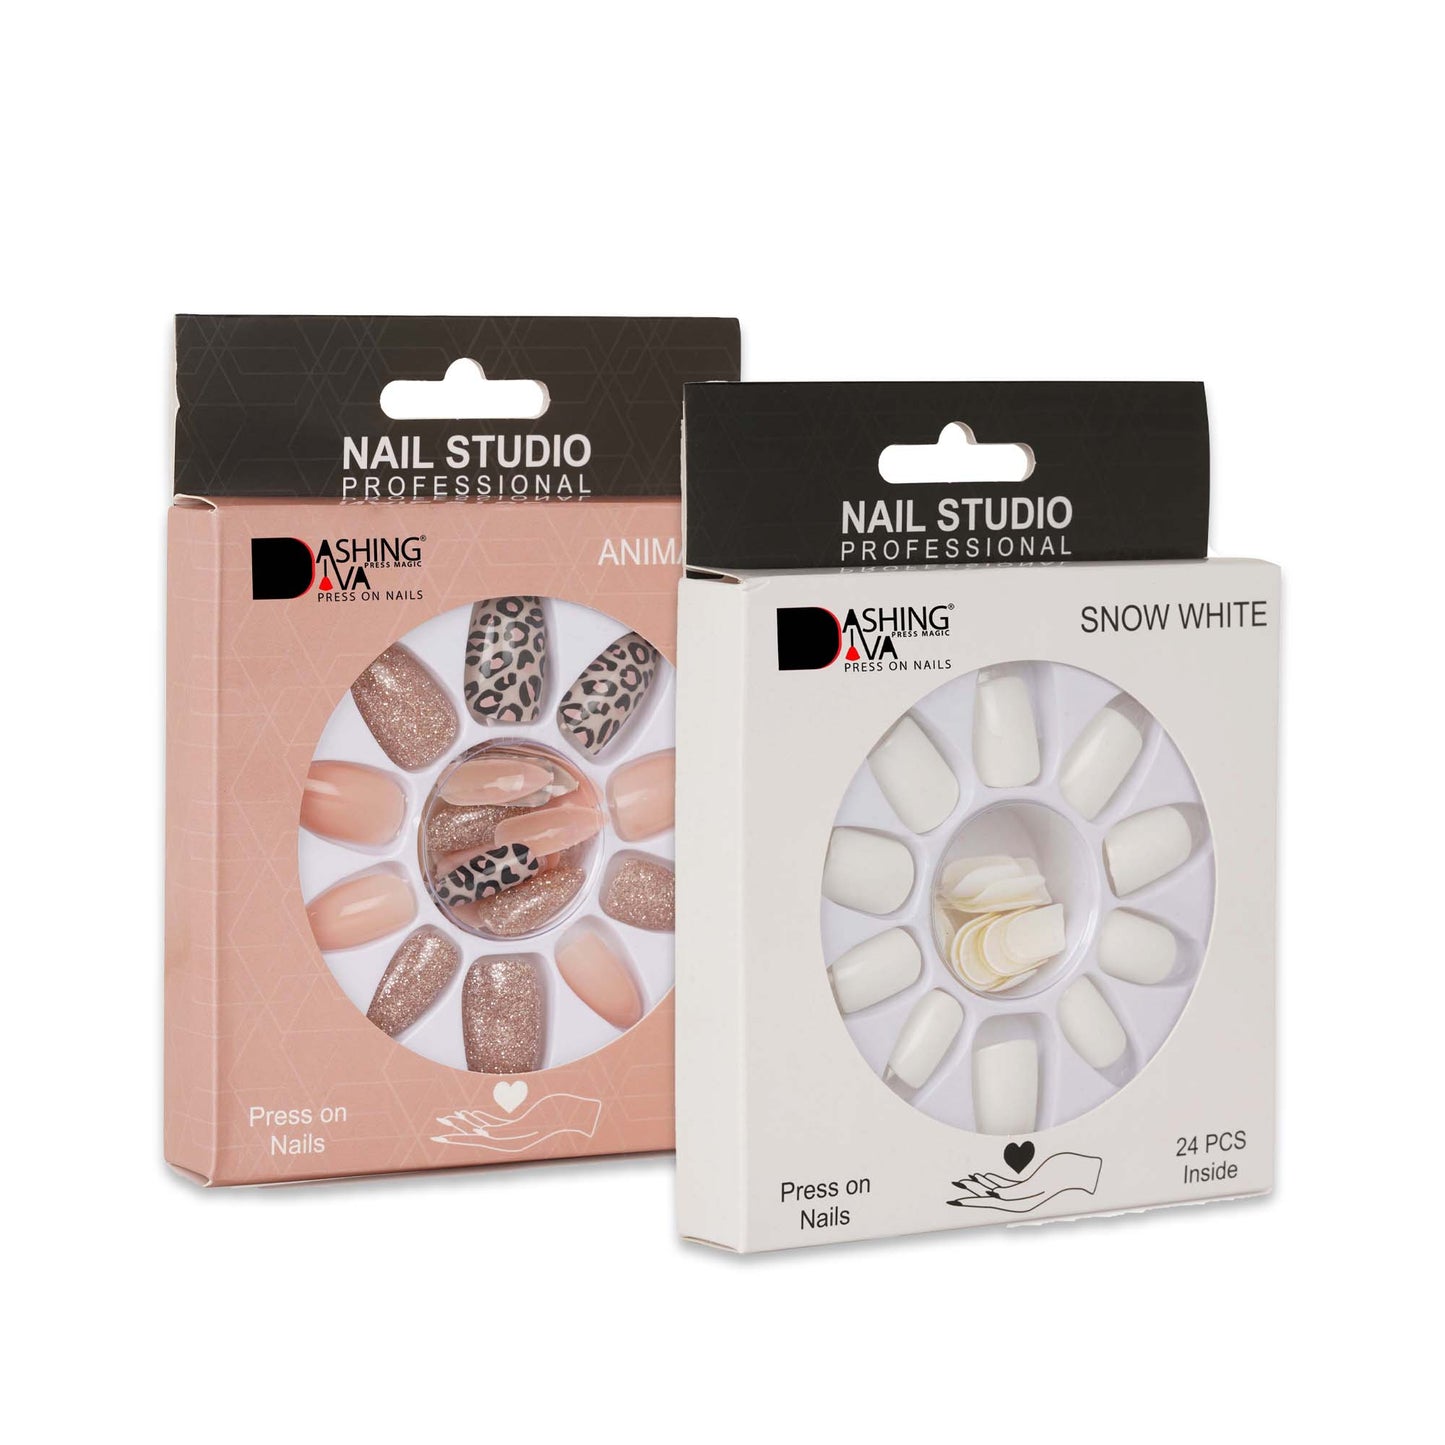 Stick On Nails | Dashing Diva Press Magic Animalier, Snow White French Manicure Nail Extension Press on Nails With Quick Dry Nail Glue, Pack of2